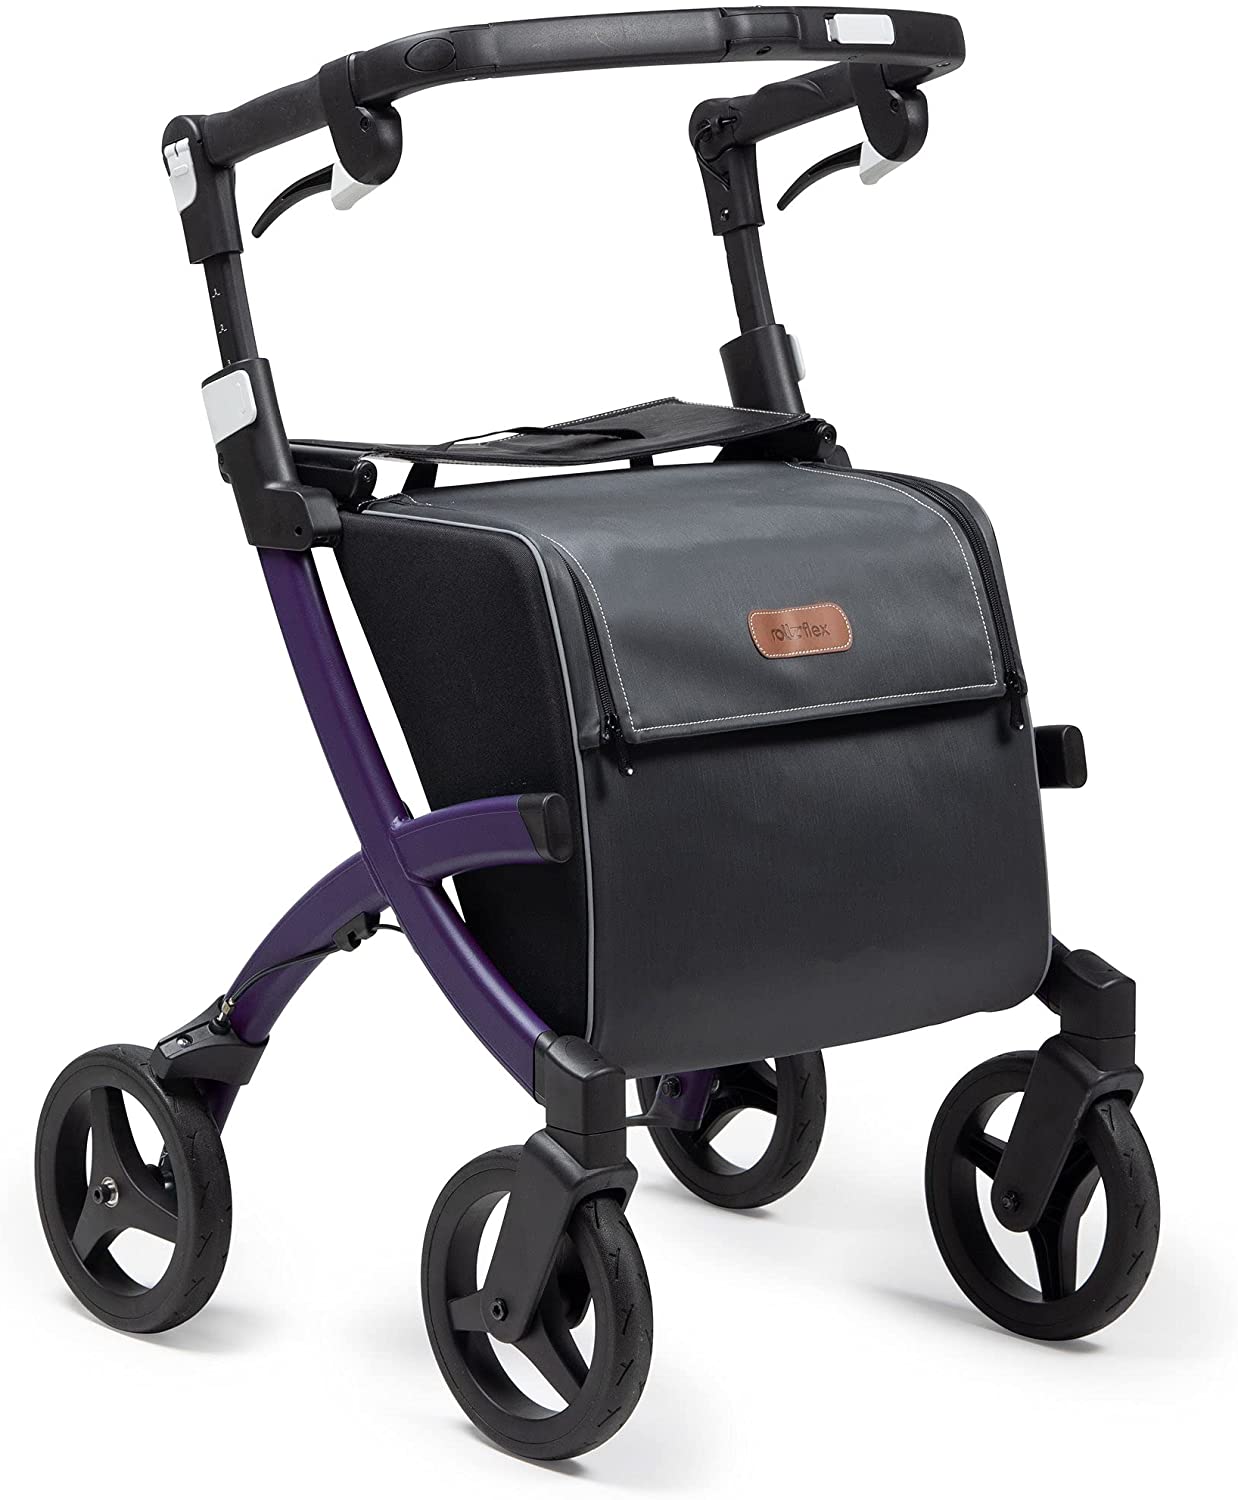 Rollz Flex 2 - Improved Rollator with Water Resistant Bag (Standard Size, W